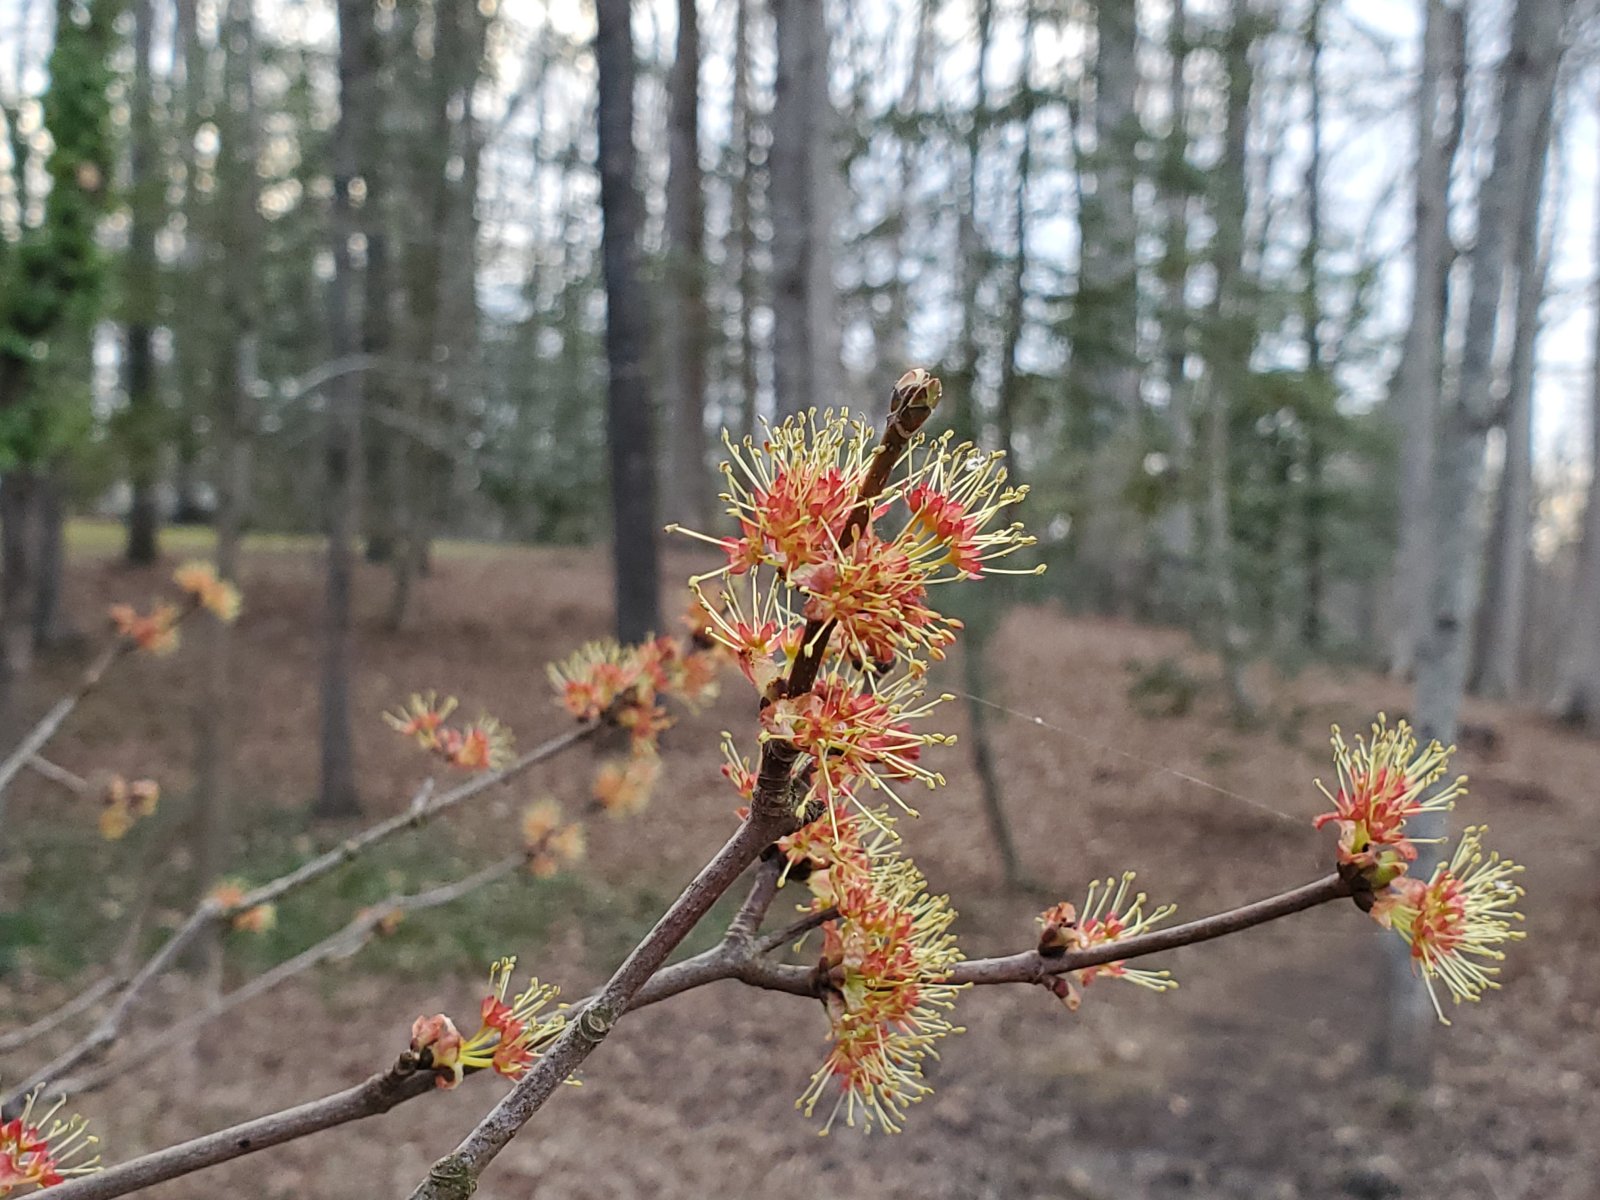 Red Maple flowers for the early pollinators. : Winter : Richmond VA Landscape Designer: Gardens by Monit, LLC: Monit Rosendale landscape designer Richmond and Charlottesville Virginia and Fredericksburg Virginia and Williamsburg Virginia